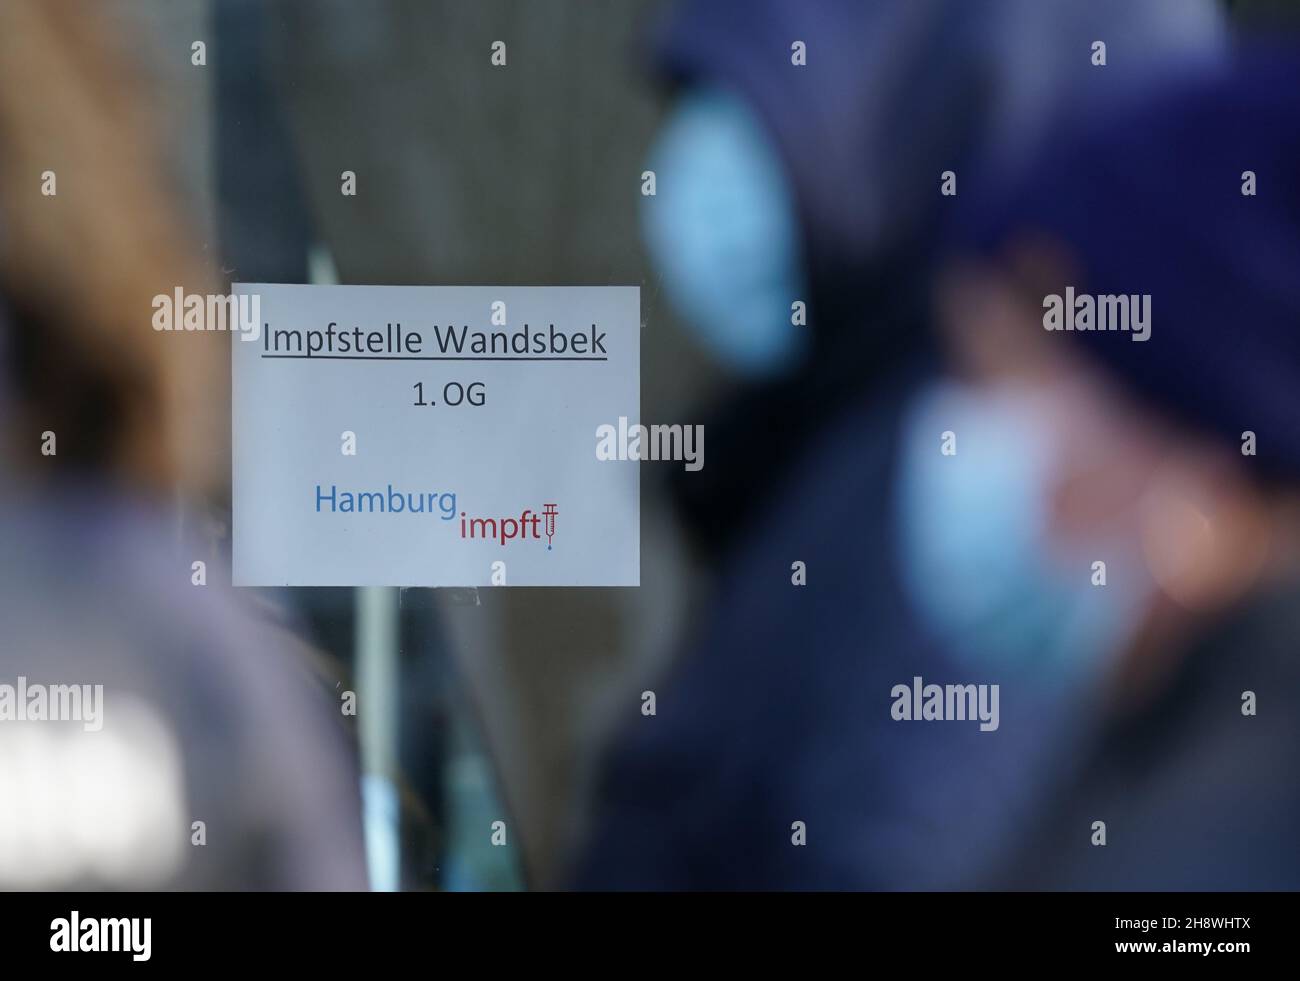 Hamburg, Germany. 02nd Dec, 2021. People willing to be vaccinated stand in a queue in front of the vaccination centre in the district of Wandsbek in front of a sign 'Impfstelle Wandsbek 1.OG Hamburg impft'. Credit: Marcus Brandt/dpa/Alamy Live News Stock Photo